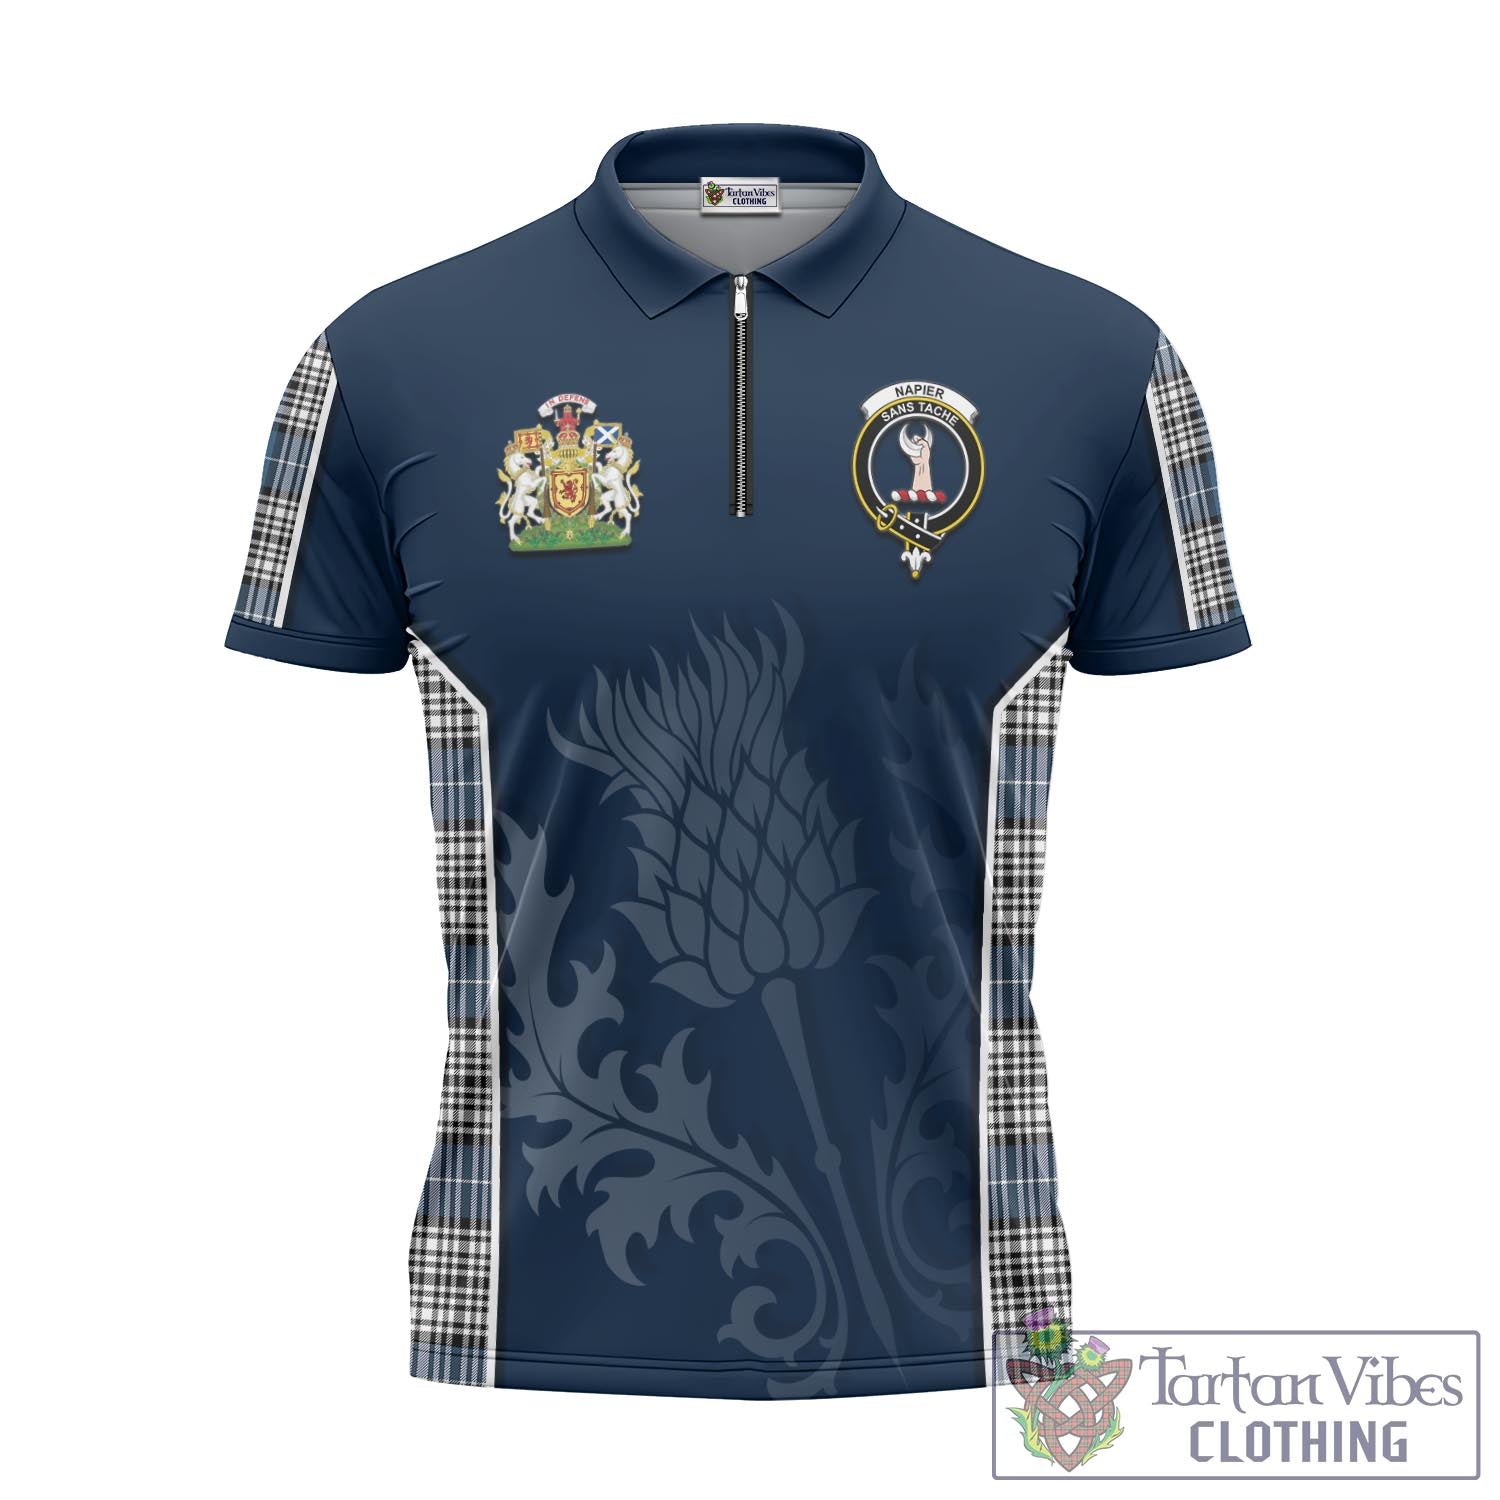 Tartan Vibes Clothing Napier Modern Tartan Zipper Polo Shirt with Family Crest and Scottish Thistle Vibes Sport Style